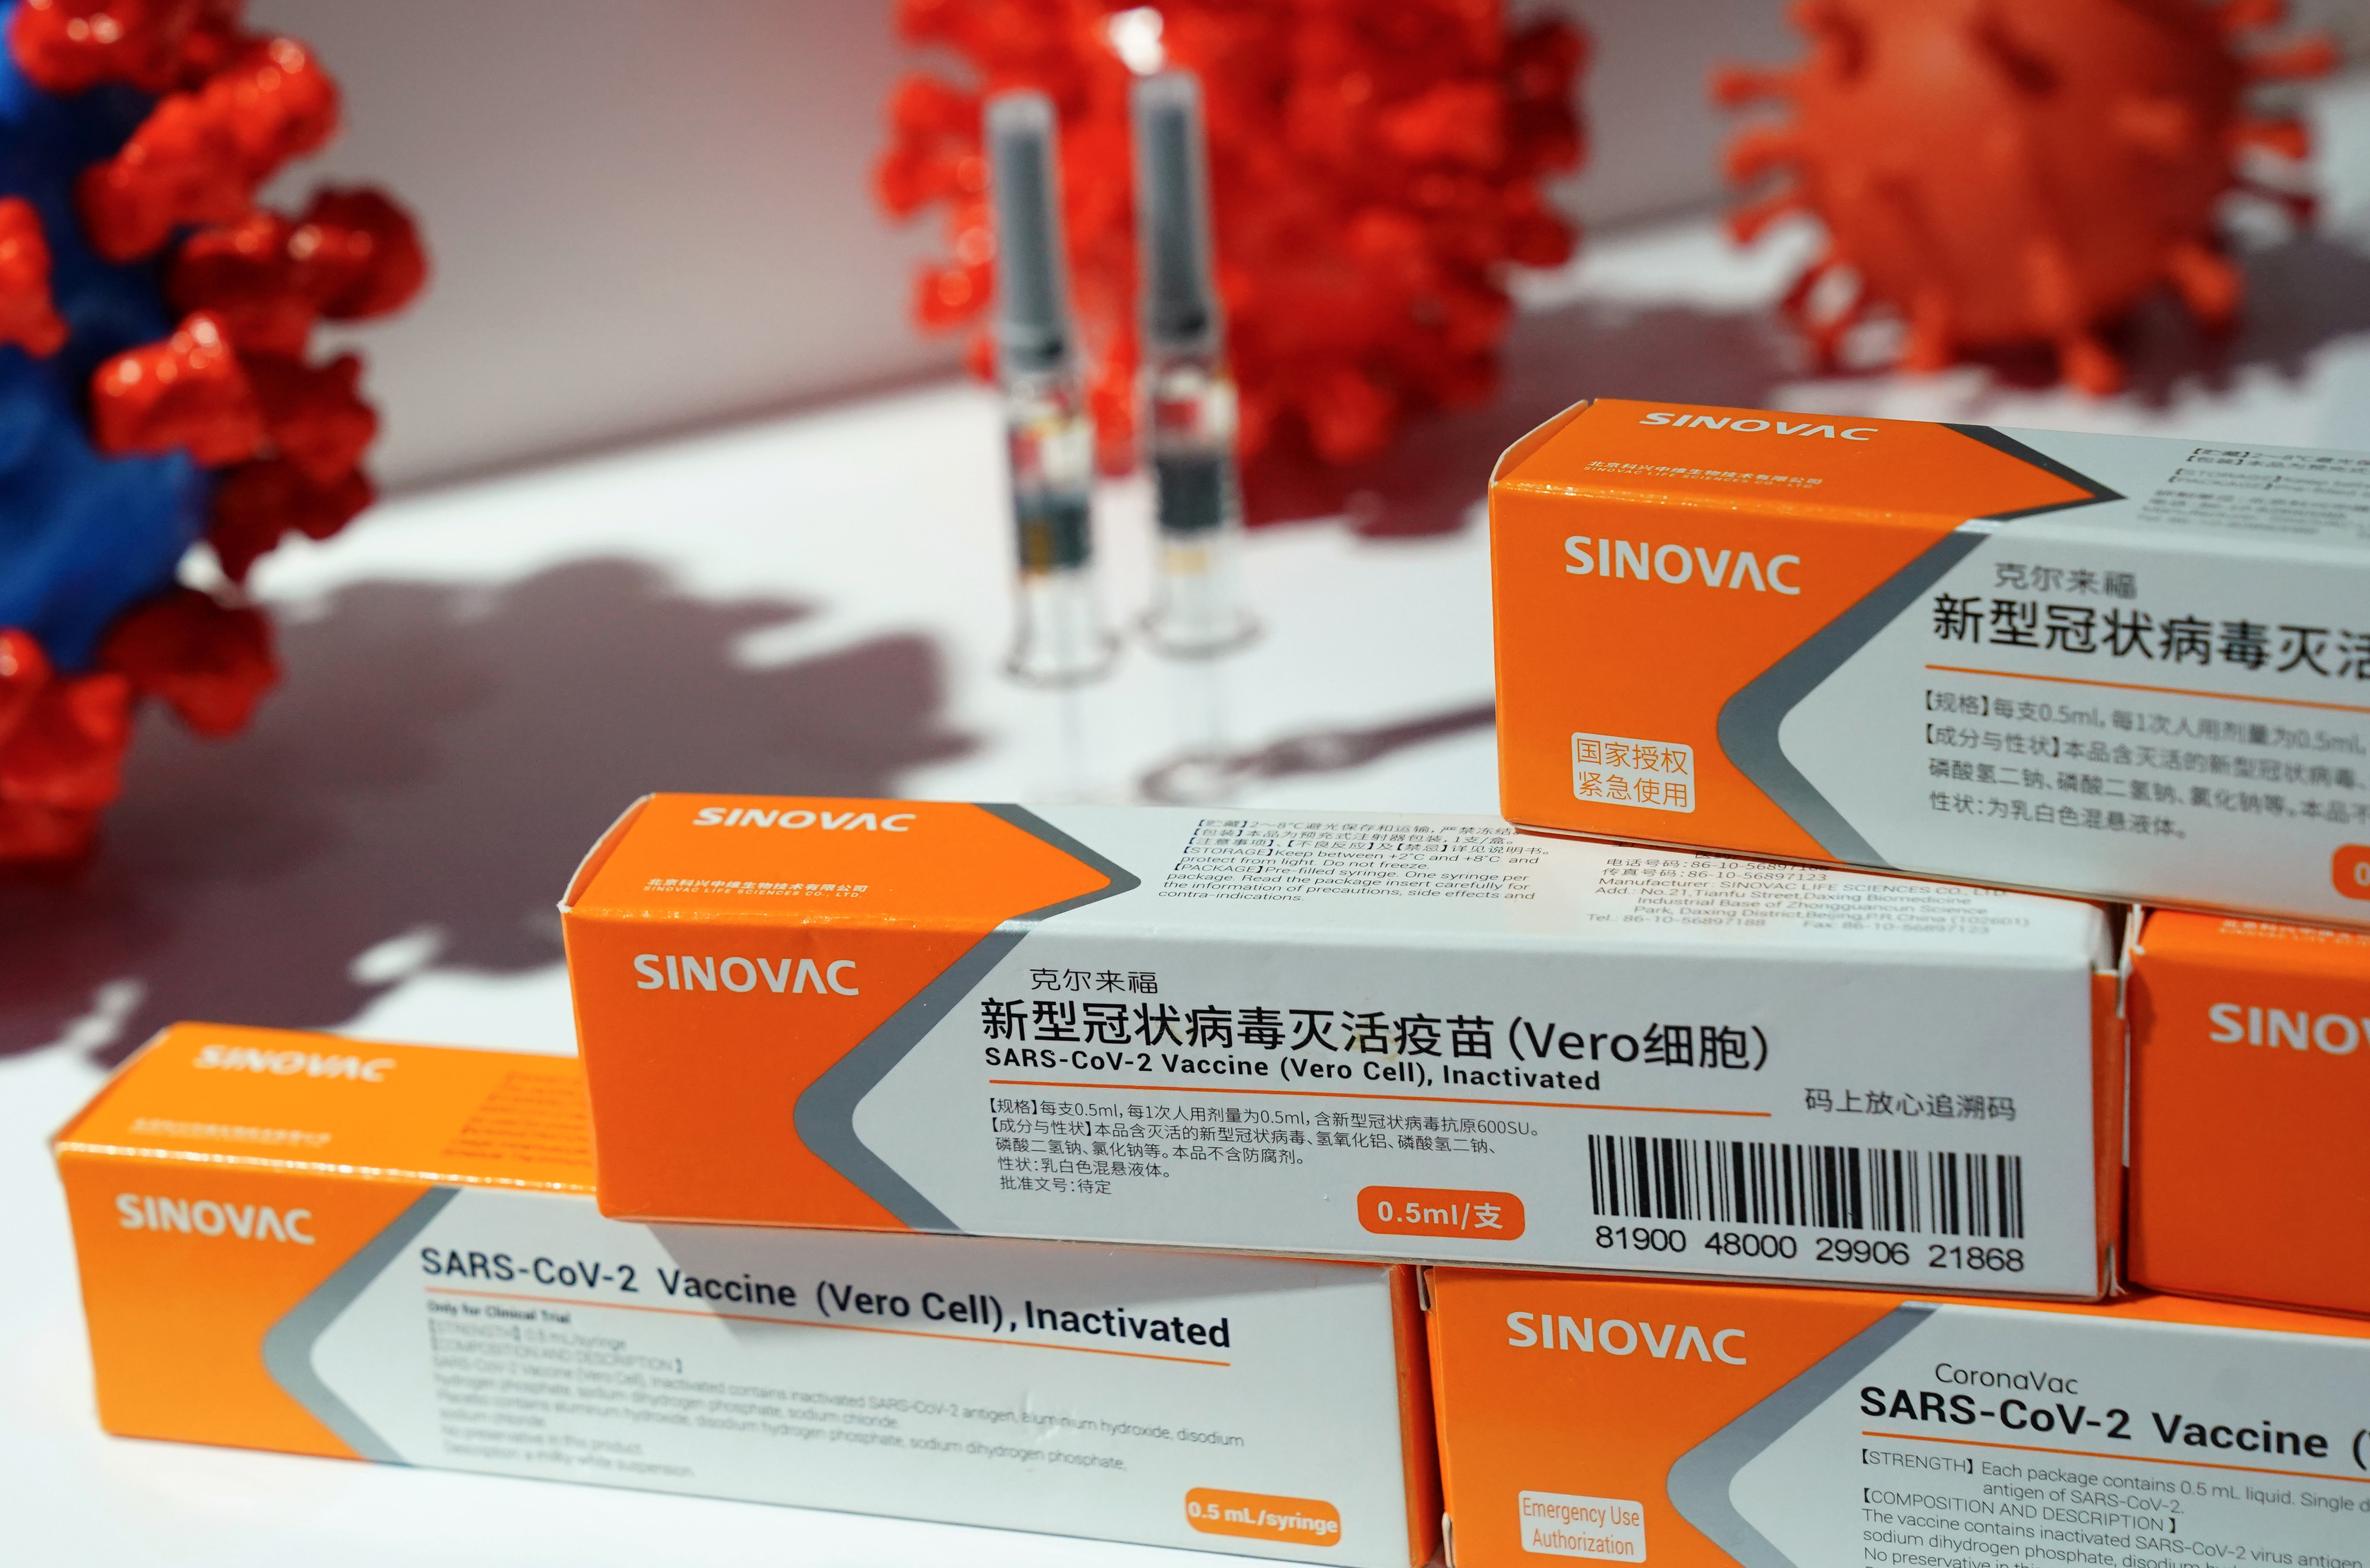 Booth displaying a coronavirus vaccine candidate from Sinovac Biotech Ltd is seen at the 2020 China International Fair for Trade in Services (CIFTIS), following the COVID-19 outbreak, in Beijing